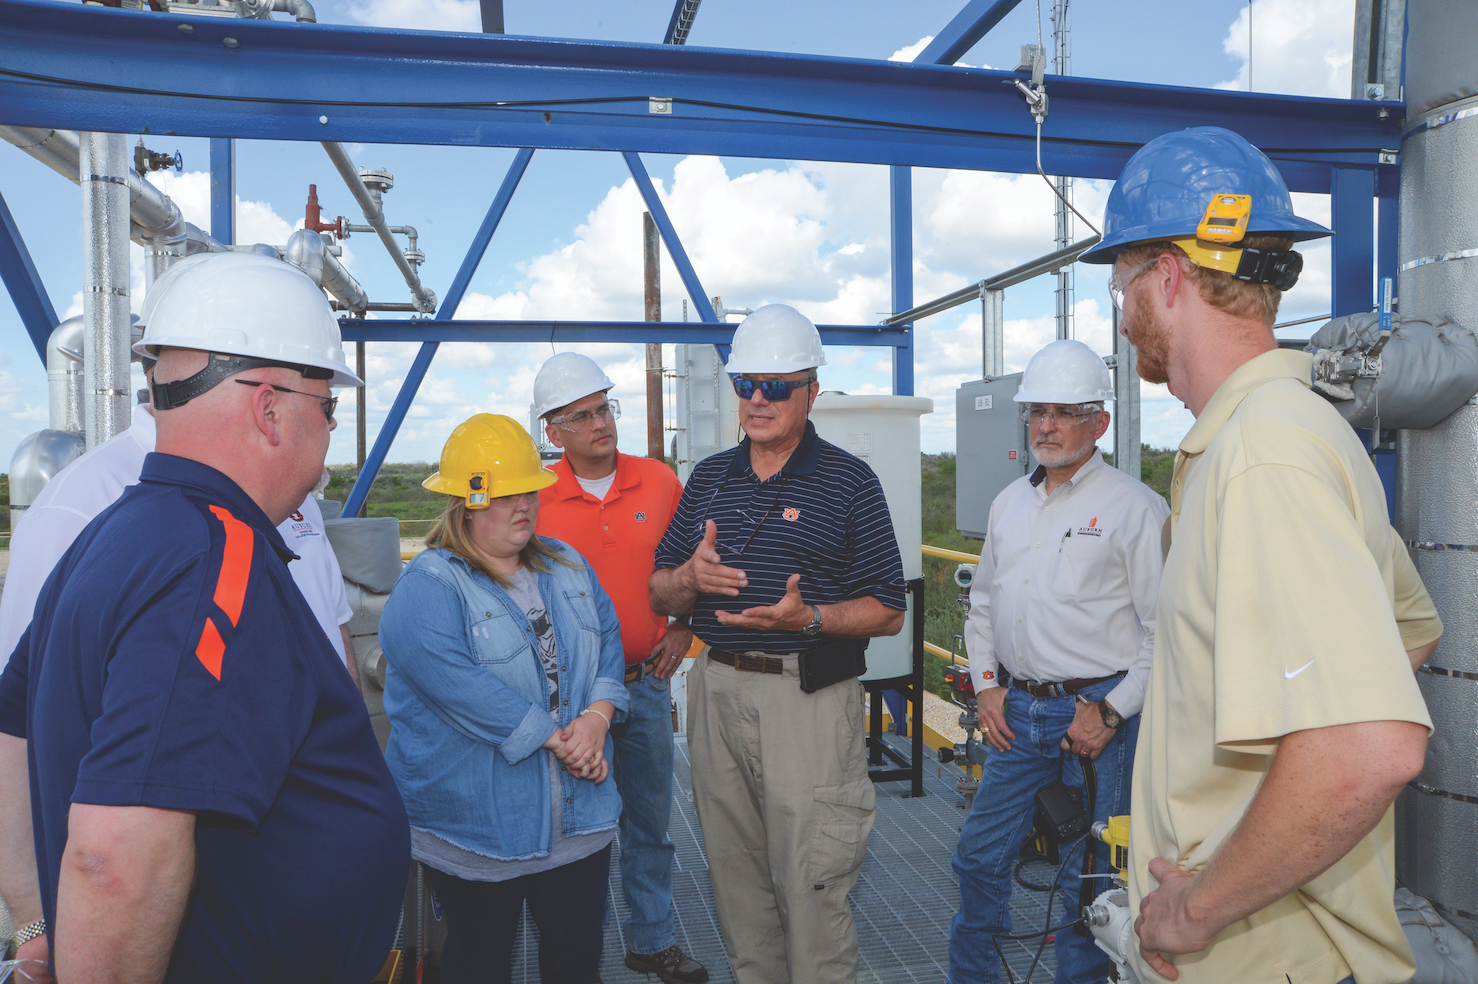 Bruce Tatarchuk, center, discusses the technology surrounding a demonstration site located in Texas about an hour out of San Anto- nio in the Eagle Ford shale formation. Pictured from left are Mario Eden, chair of the Department of Chemical Engineering; resident engineer Kylie Webb; Brian Wright, director of commercialization in Auburn’s Office of Innovation Advancement and Commercialization; Tatarchuk; Steve Taylor, associate dean of research in the College of Engineering, and resident engineer Harrison Wright.